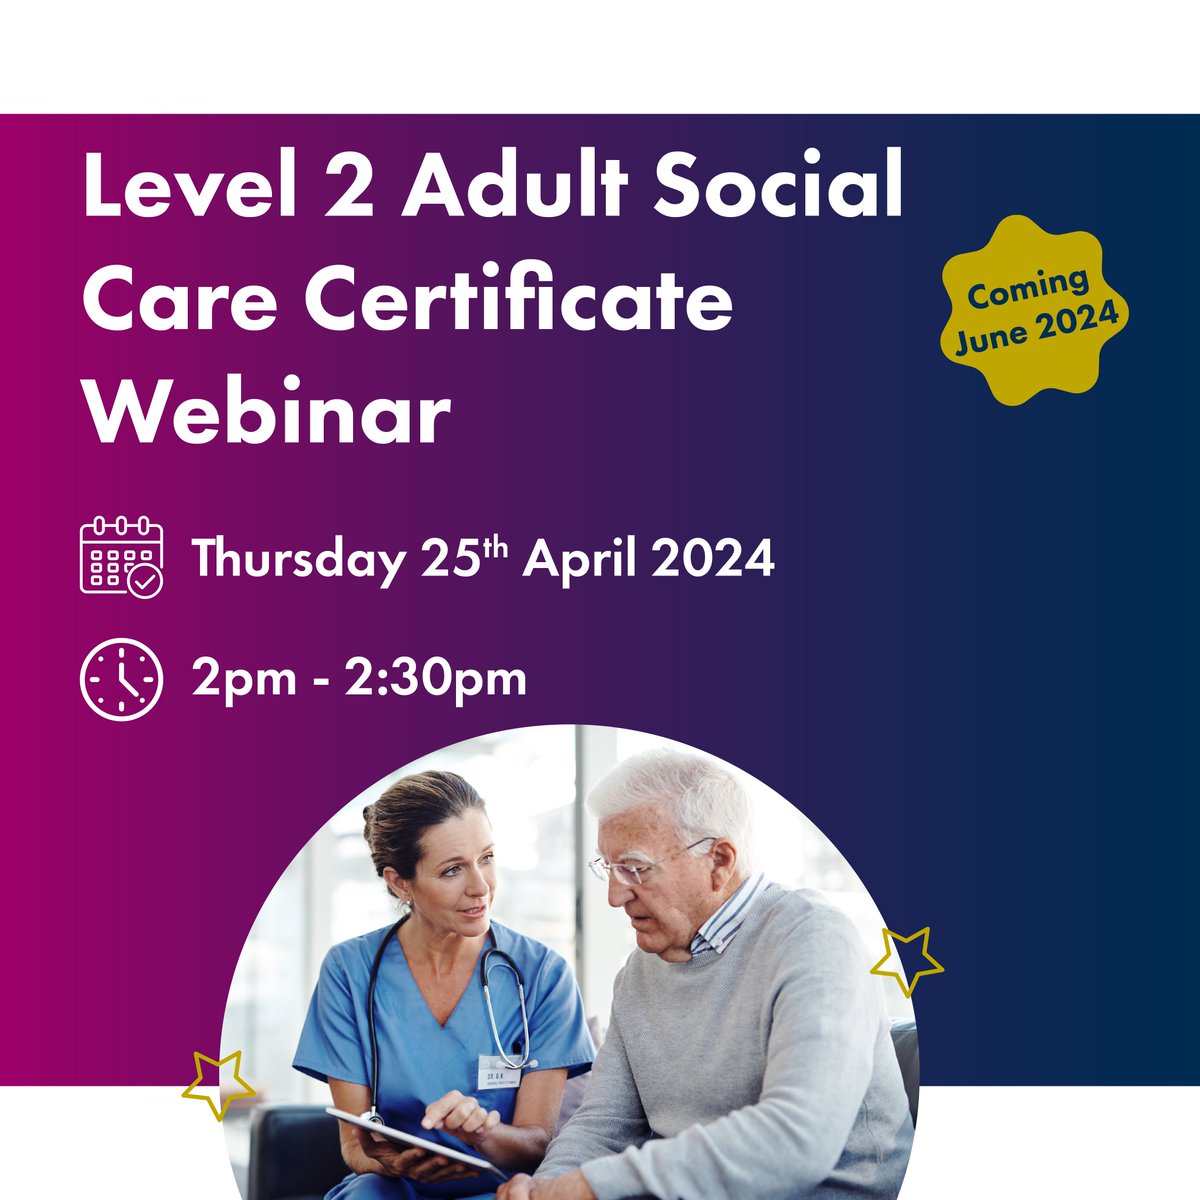 This is your last chance to register your place on tomorrow's webinar with our Health & Social Care expert, Cheryle Hardy. Register your place today: shorturl.at/aequE